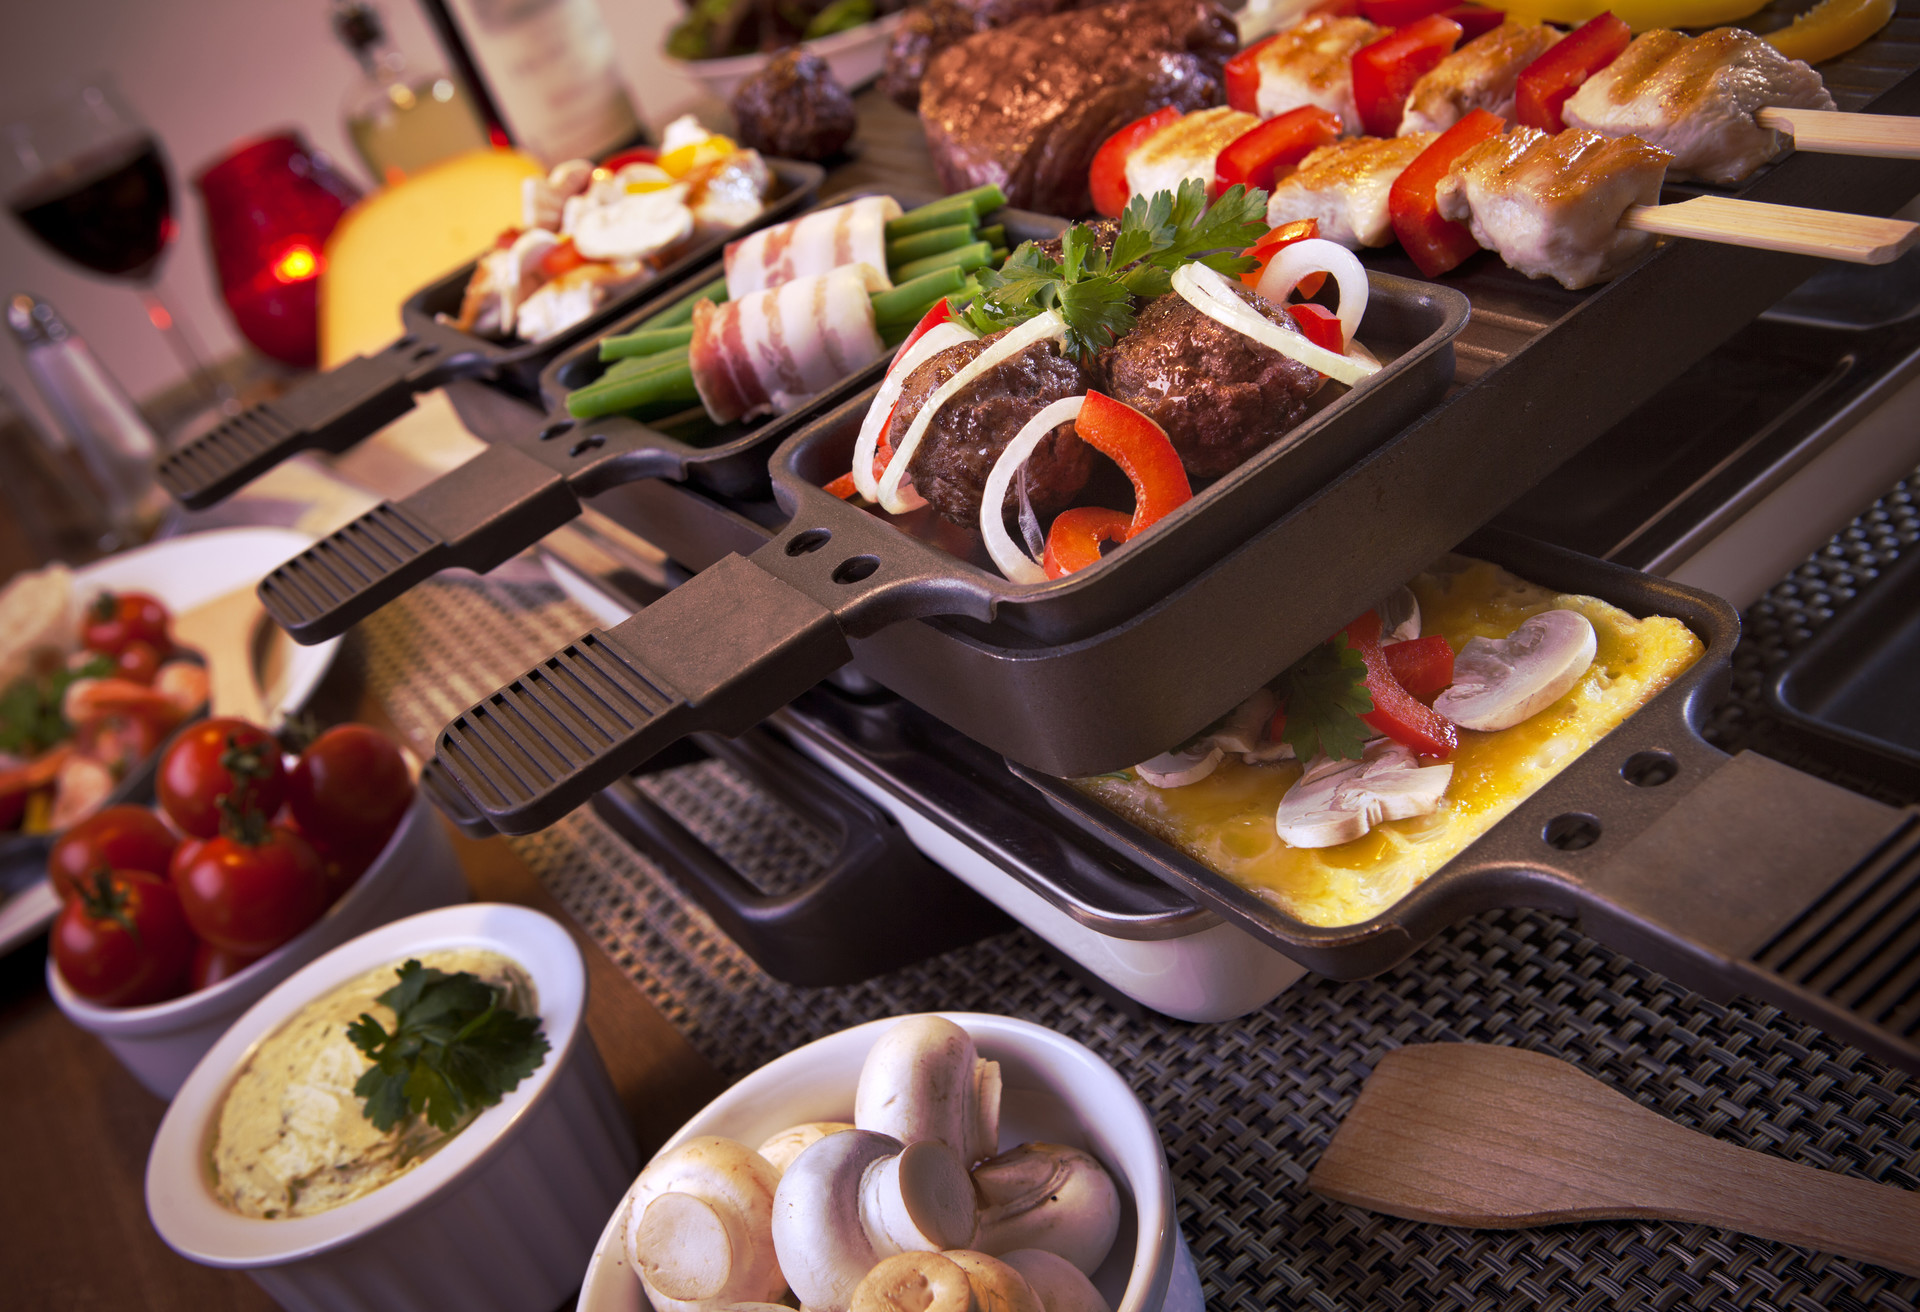 Swiss raclette or the Dutch variant 'gourmetten'. A table filled with ingredients for a dish that is usually served on celebratory evenings like Christmas or New Years Eve in The Netherlands.; Shutterstock ID 306830186; Purpose: Virtual Christmas Guides; Brand (KAYAK, Momondo, Any): Kayak; Client/Licensee: KAYAK